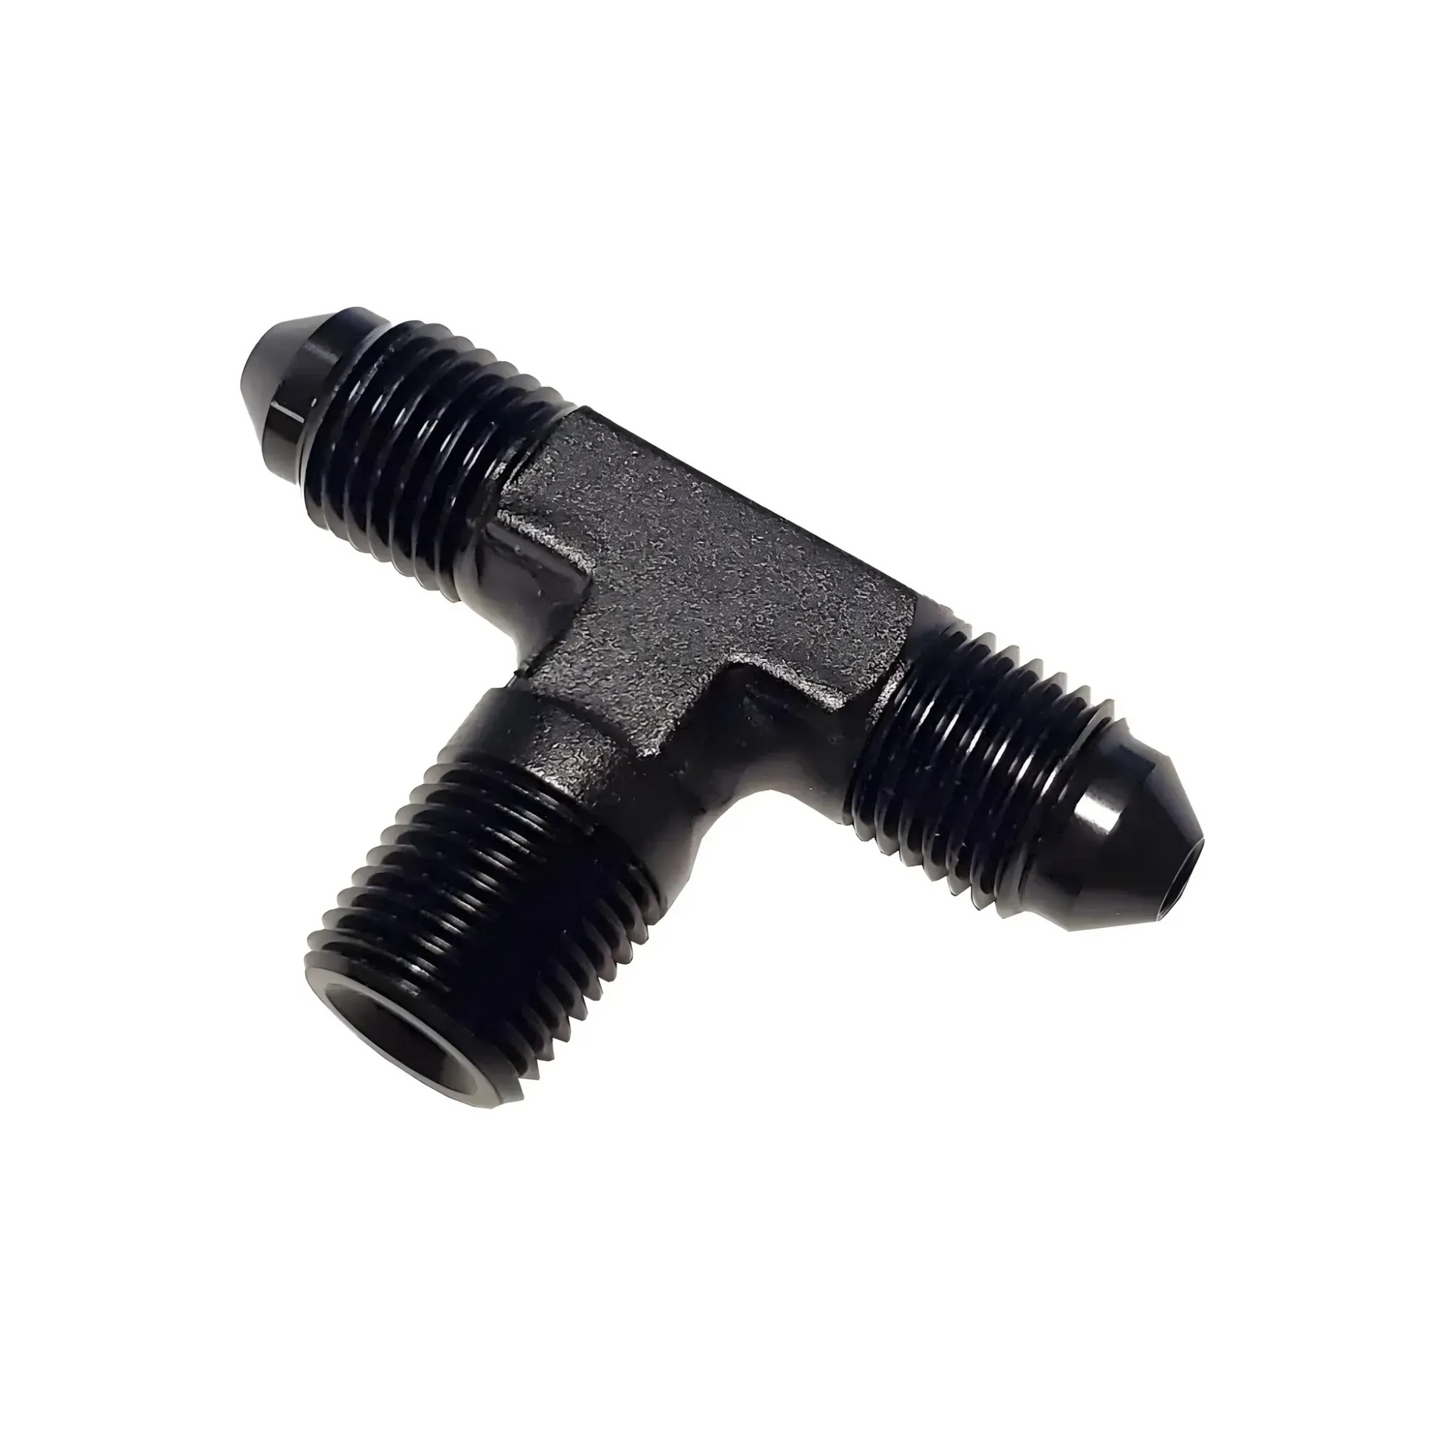 Nitrous Outlet 1/8" NPT x 3AN x 3AN Branch Tee Fitting - Male/Male/Male